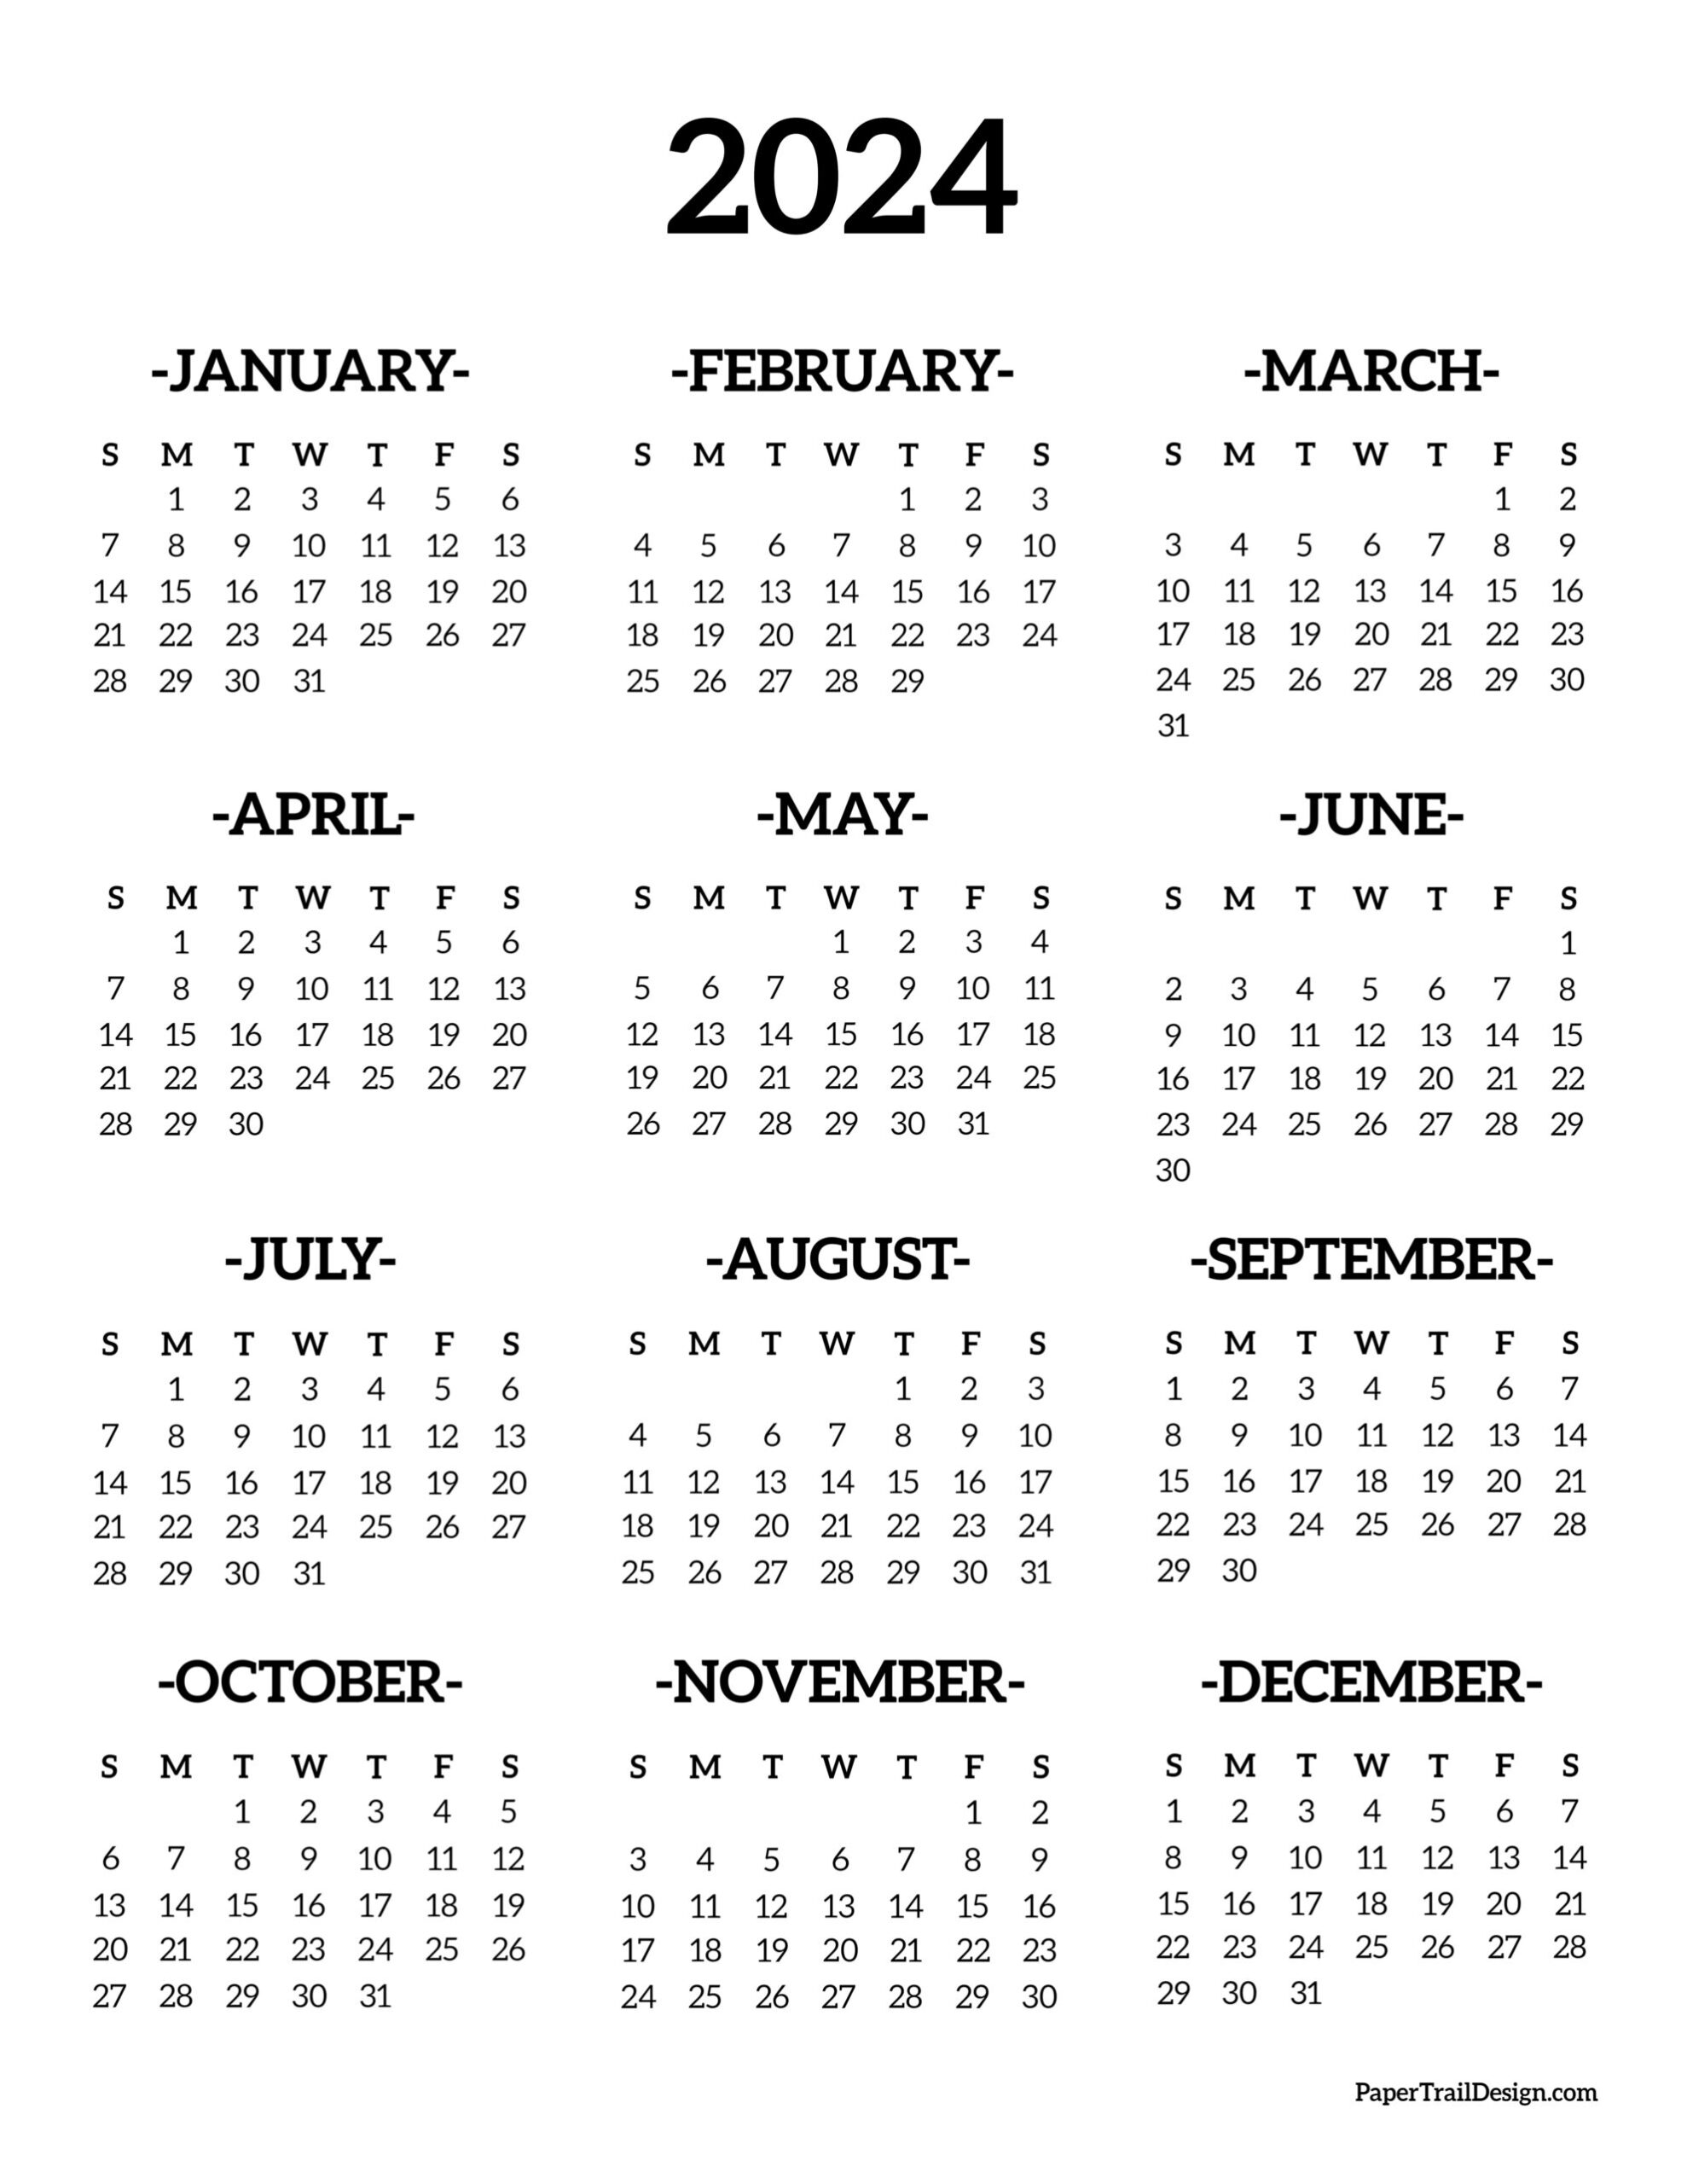 Calendar 2024 Printable One Page - Paper Trail Design for Printable Calendar Pages For 2024